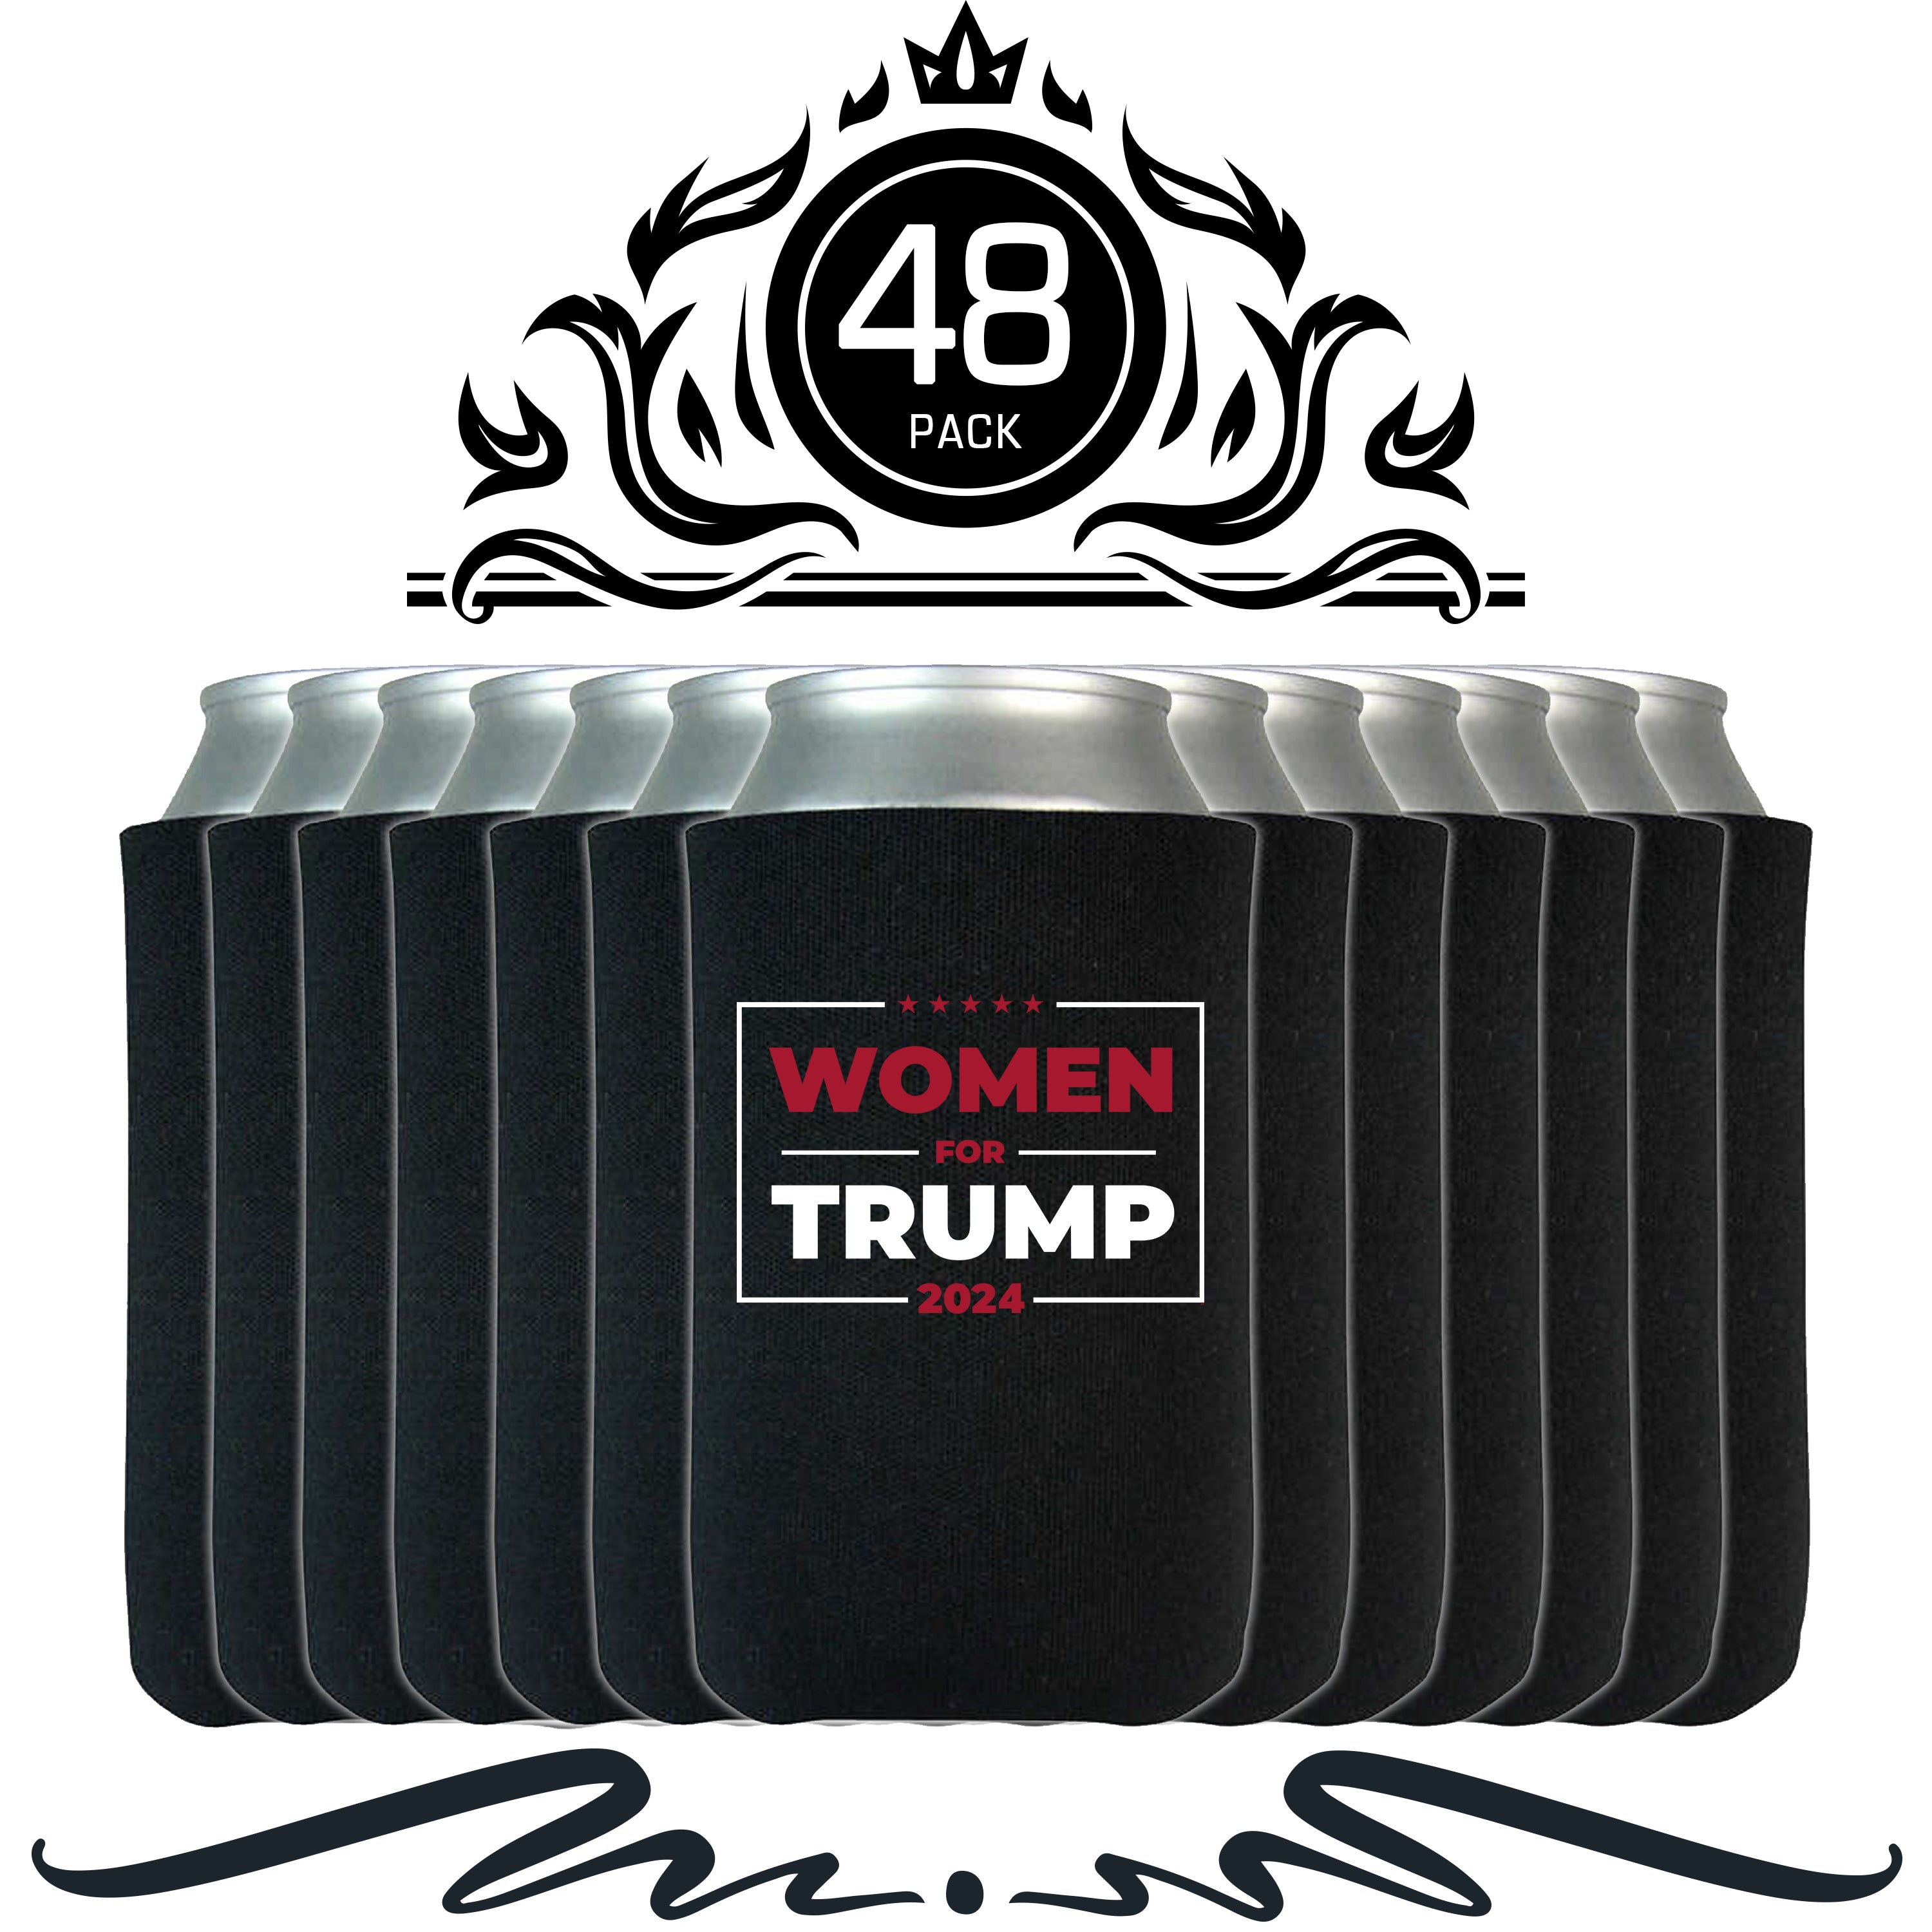 S4E® Women for Trump 2024 Political Can Coolie, Insulating Sleeve Holder for Beverage Cups